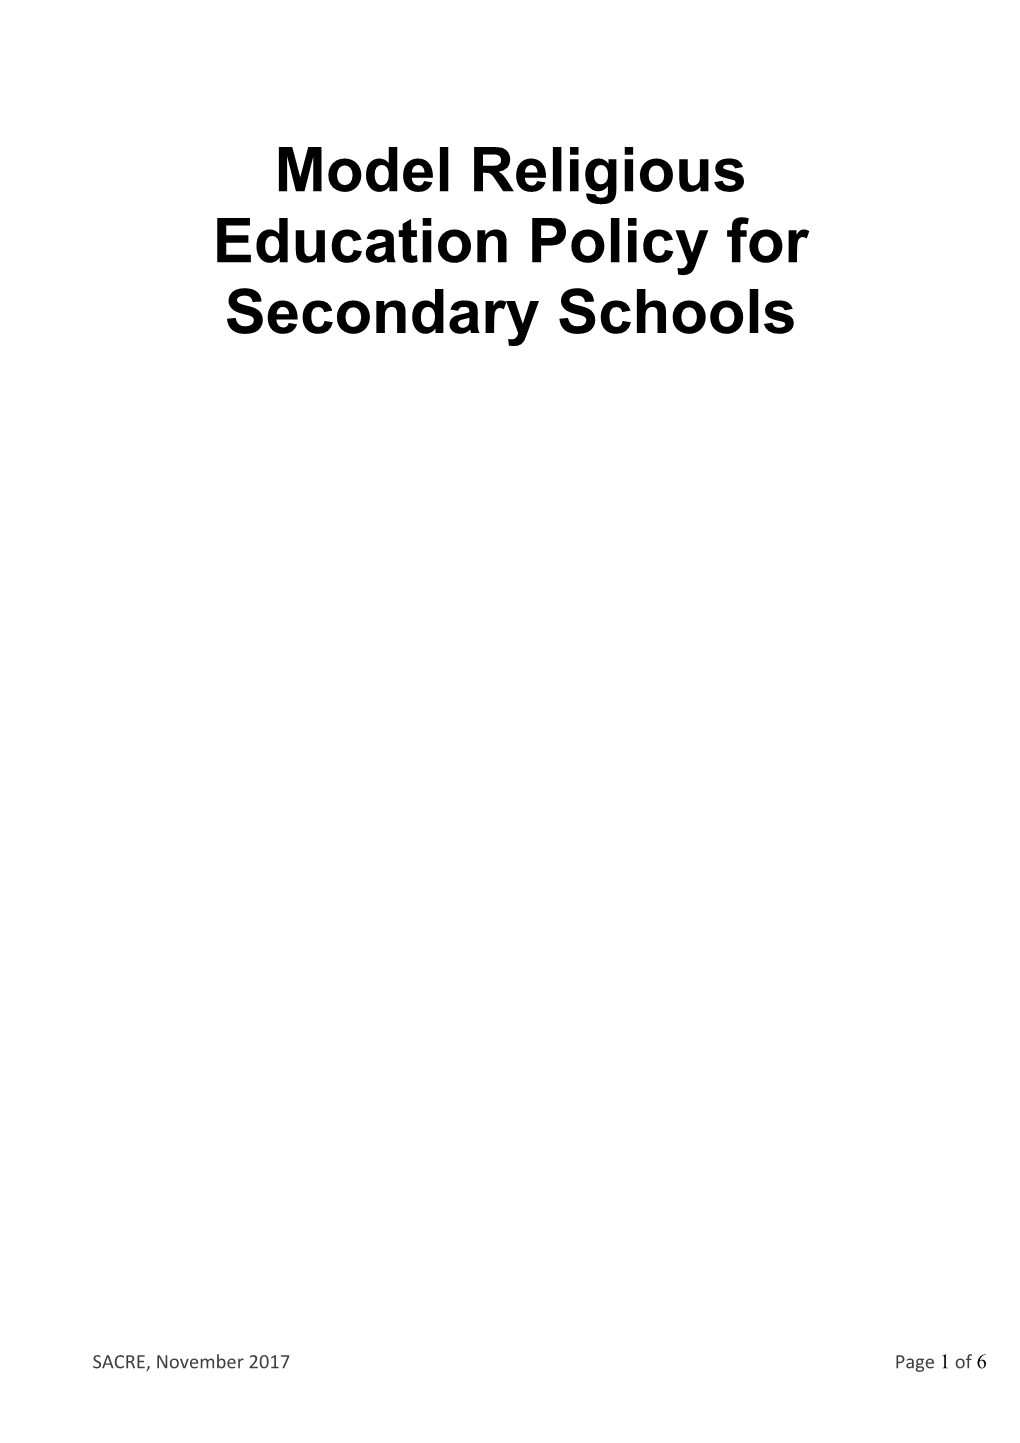 Csf0070 Model Religious Education Policy